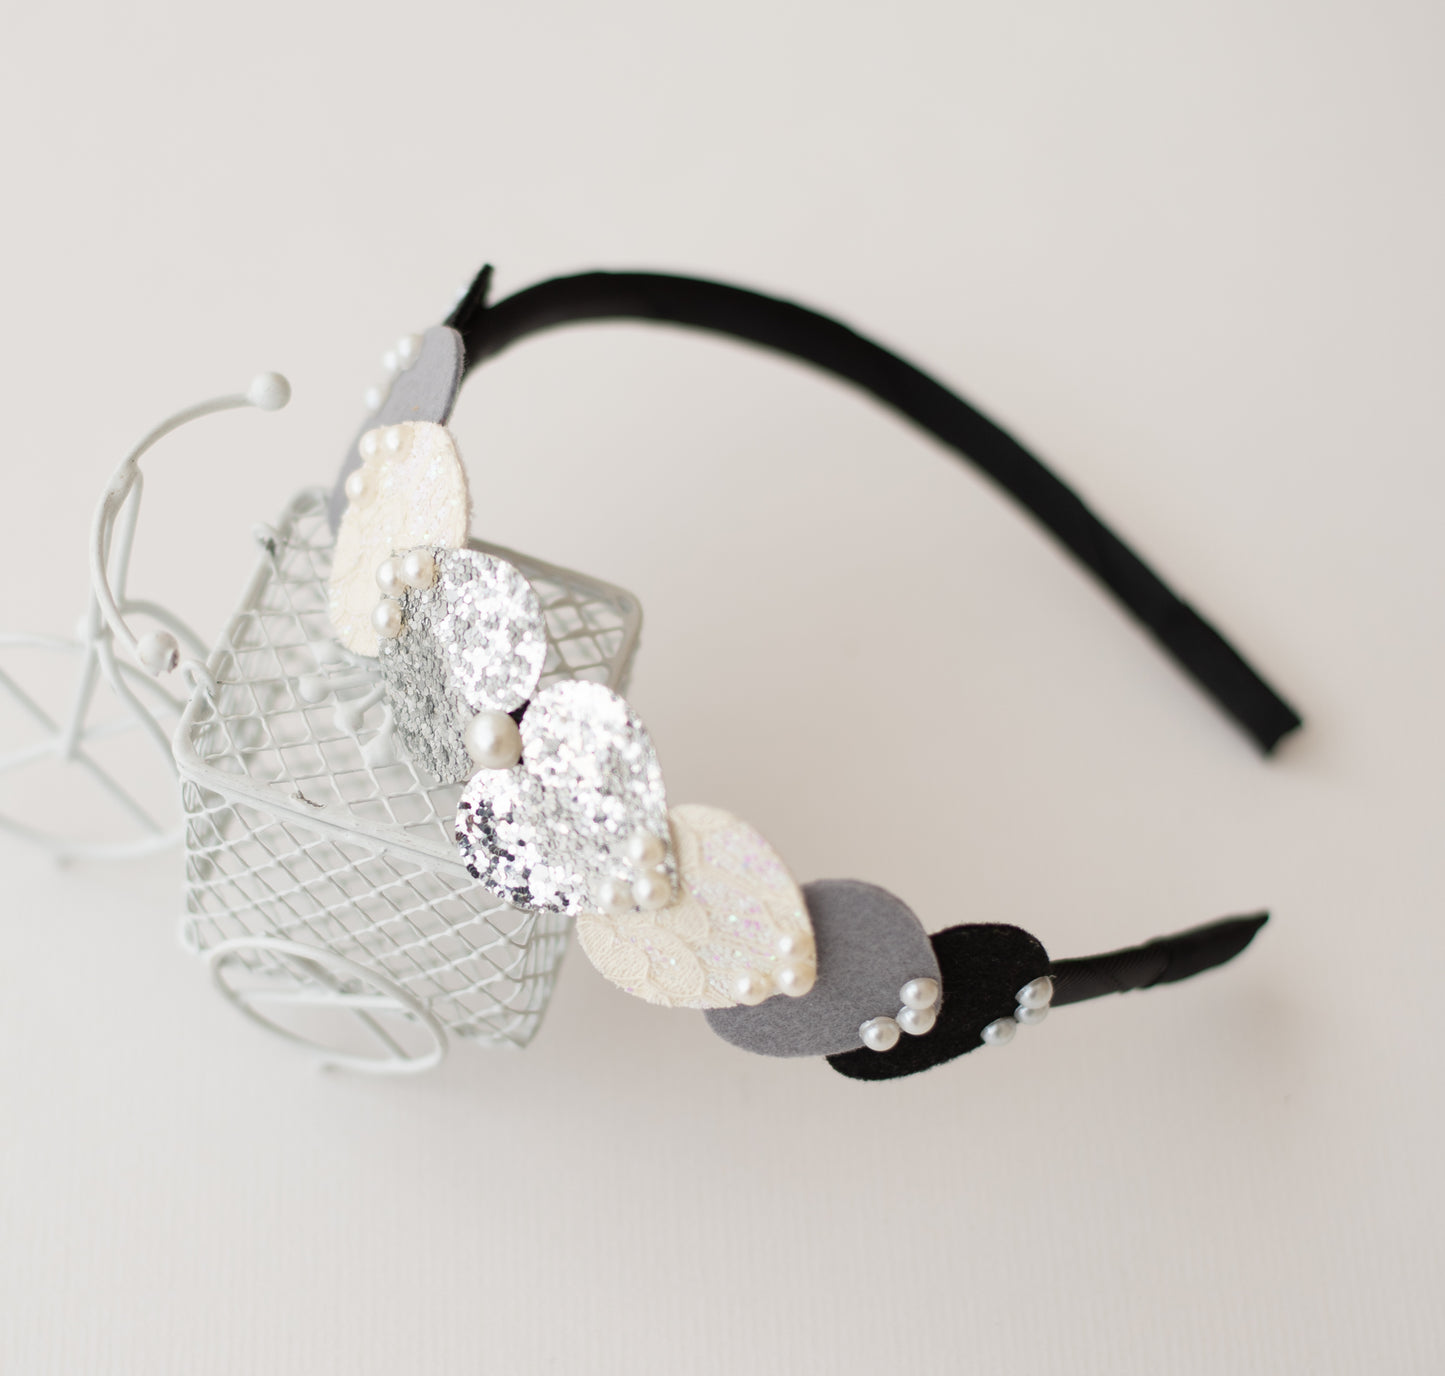 Dainty hairband with cascading hearts and pearl detailing - Black, Grey, White, Silver